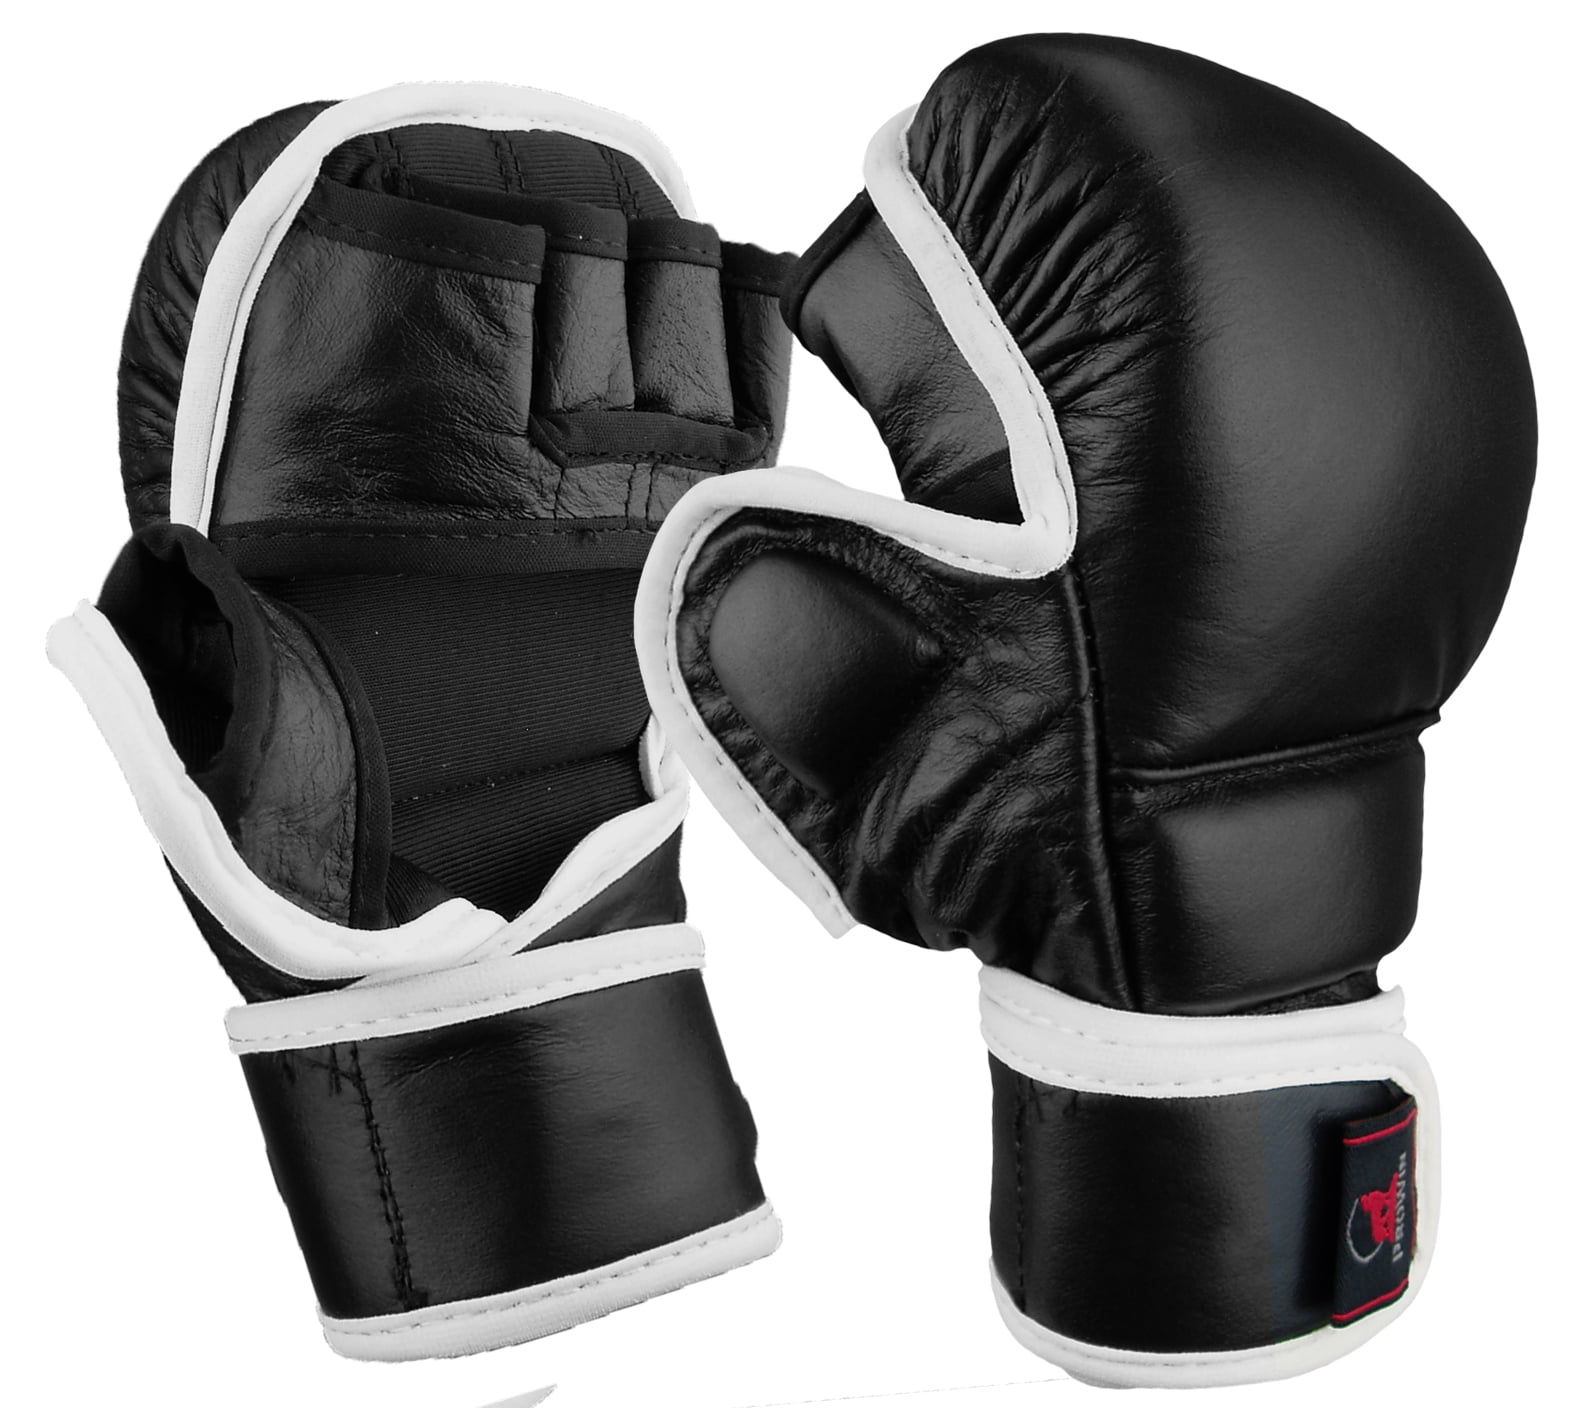 UFC Gloves MMA Fighting Training Sparring Punching Bag Boxing Gloves Black 